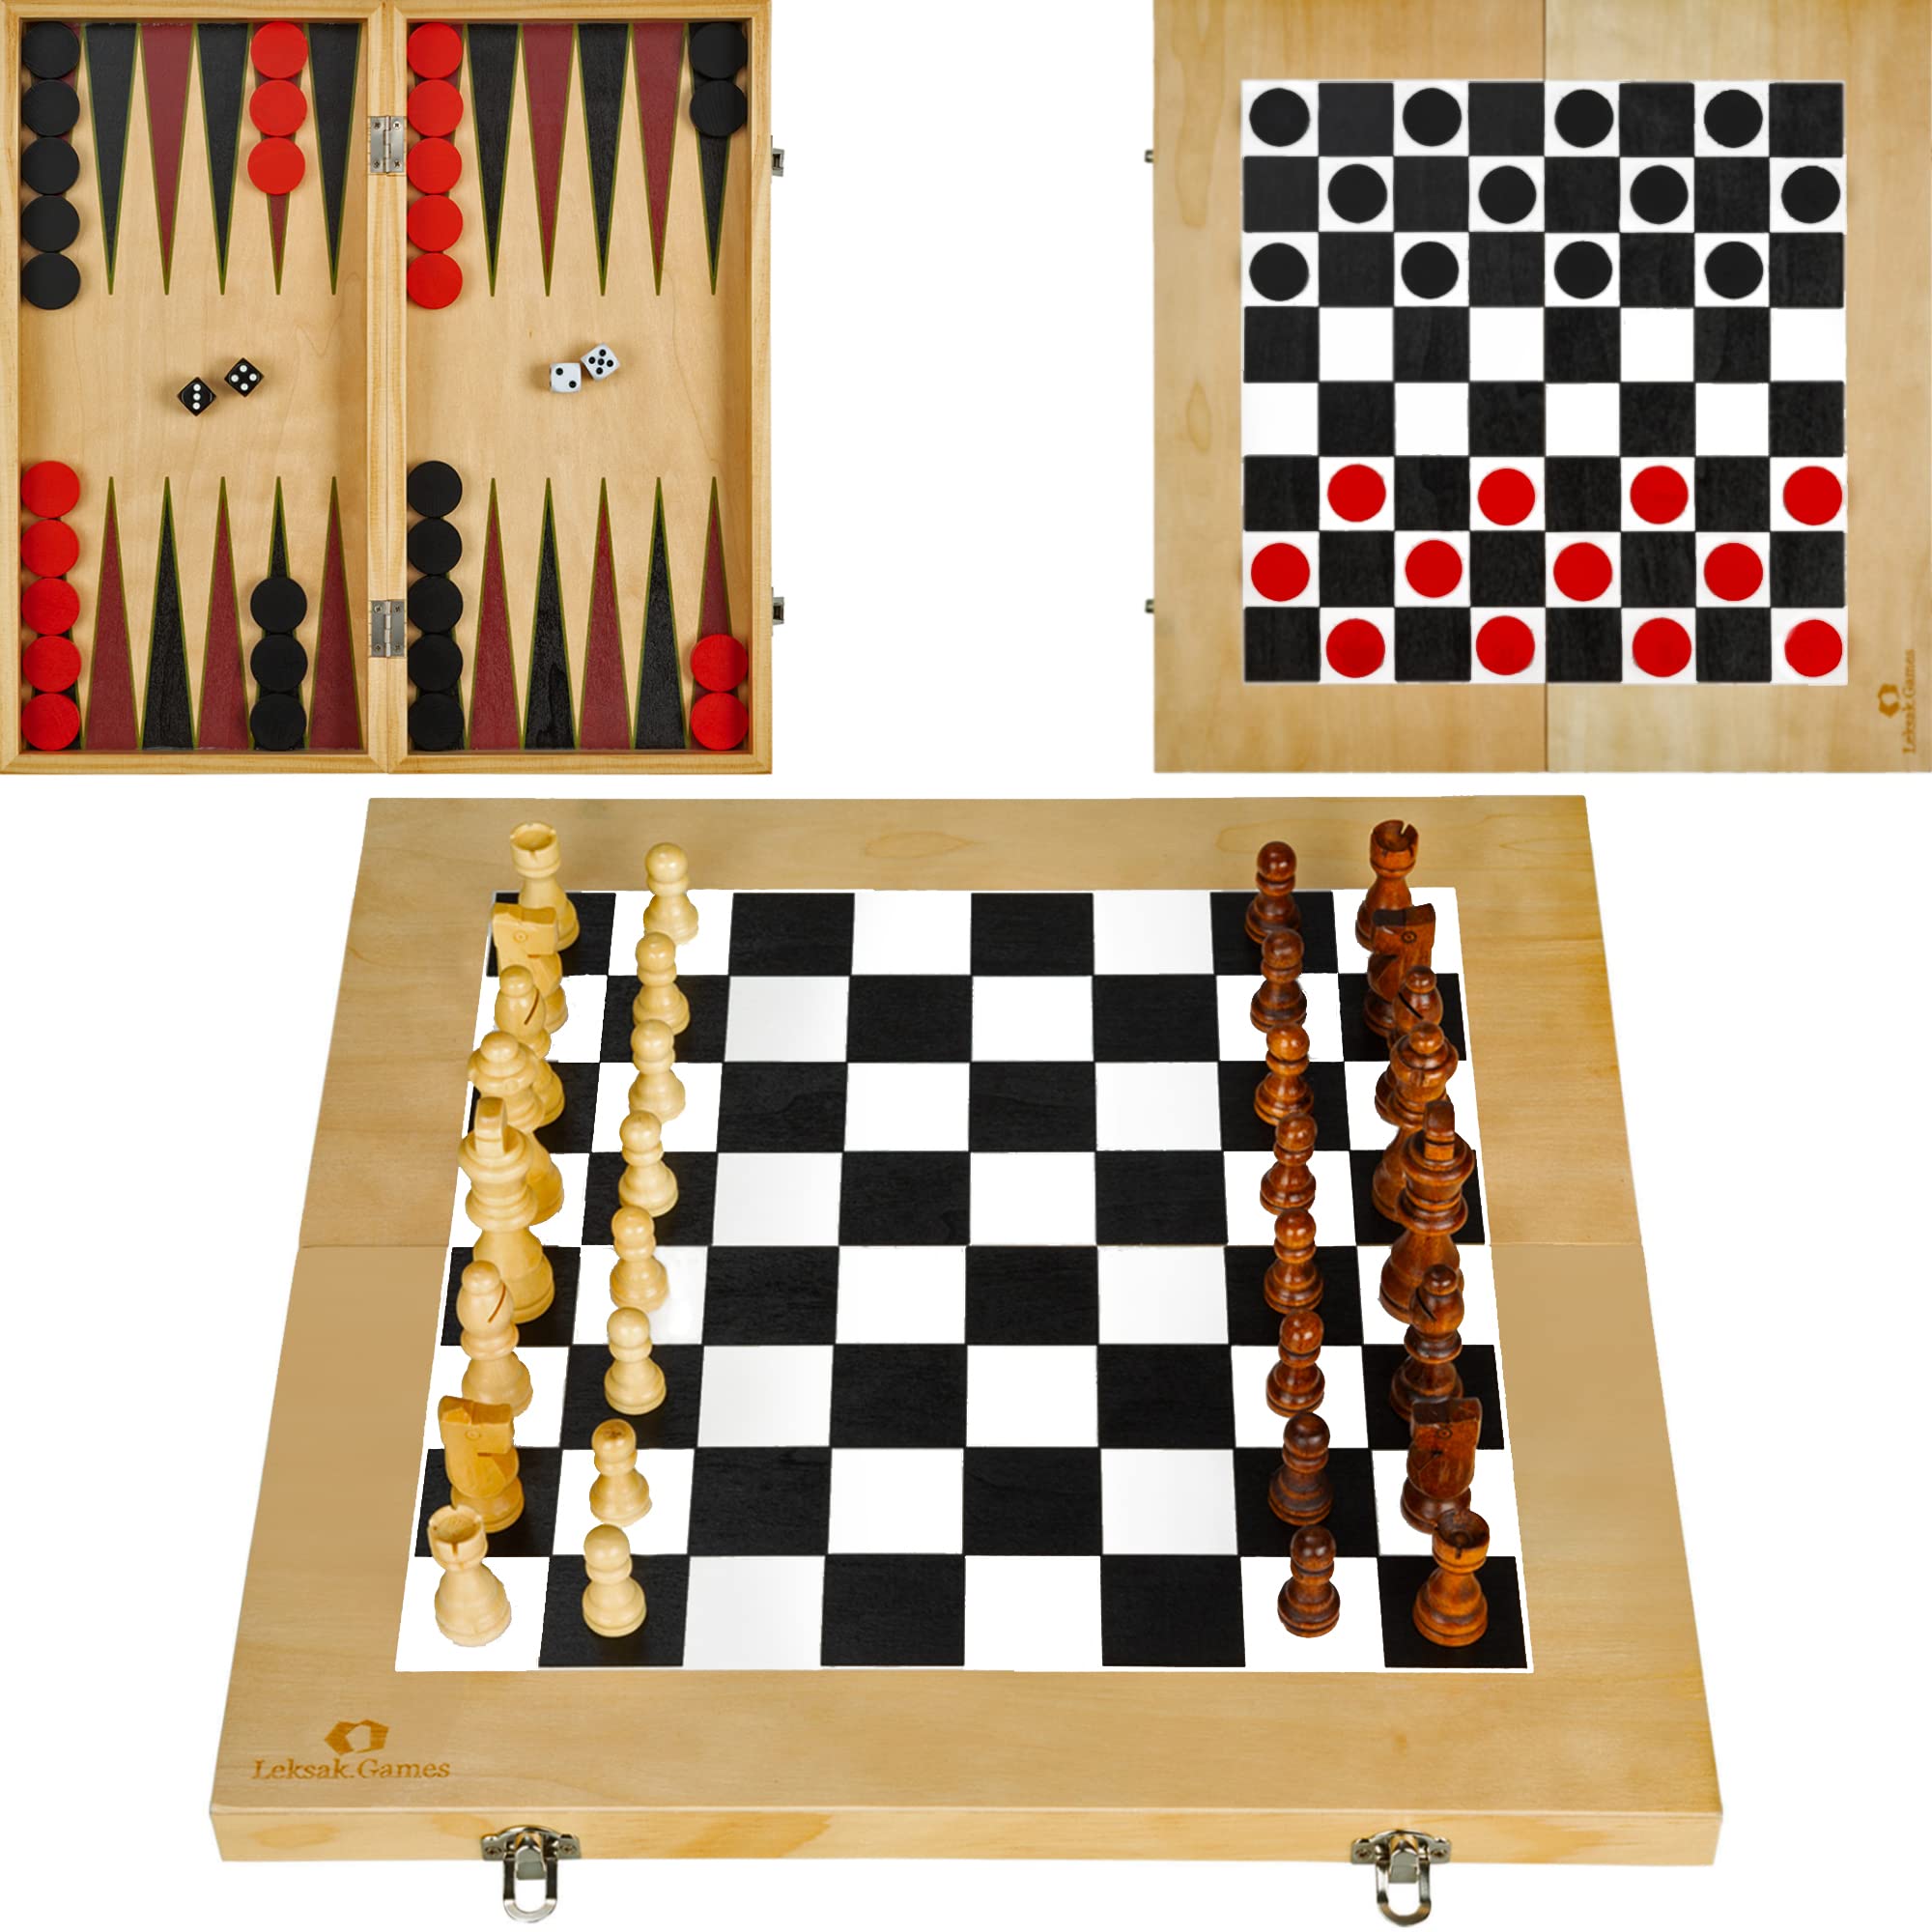 Leksak Games 16'' Wooden Chess Checkers Backgammon Set - 3 in 1 Board Games - Portable Travel Case Folding Board - Beginner Chess Set for Kids and Adults - 30 Checkers Pieces